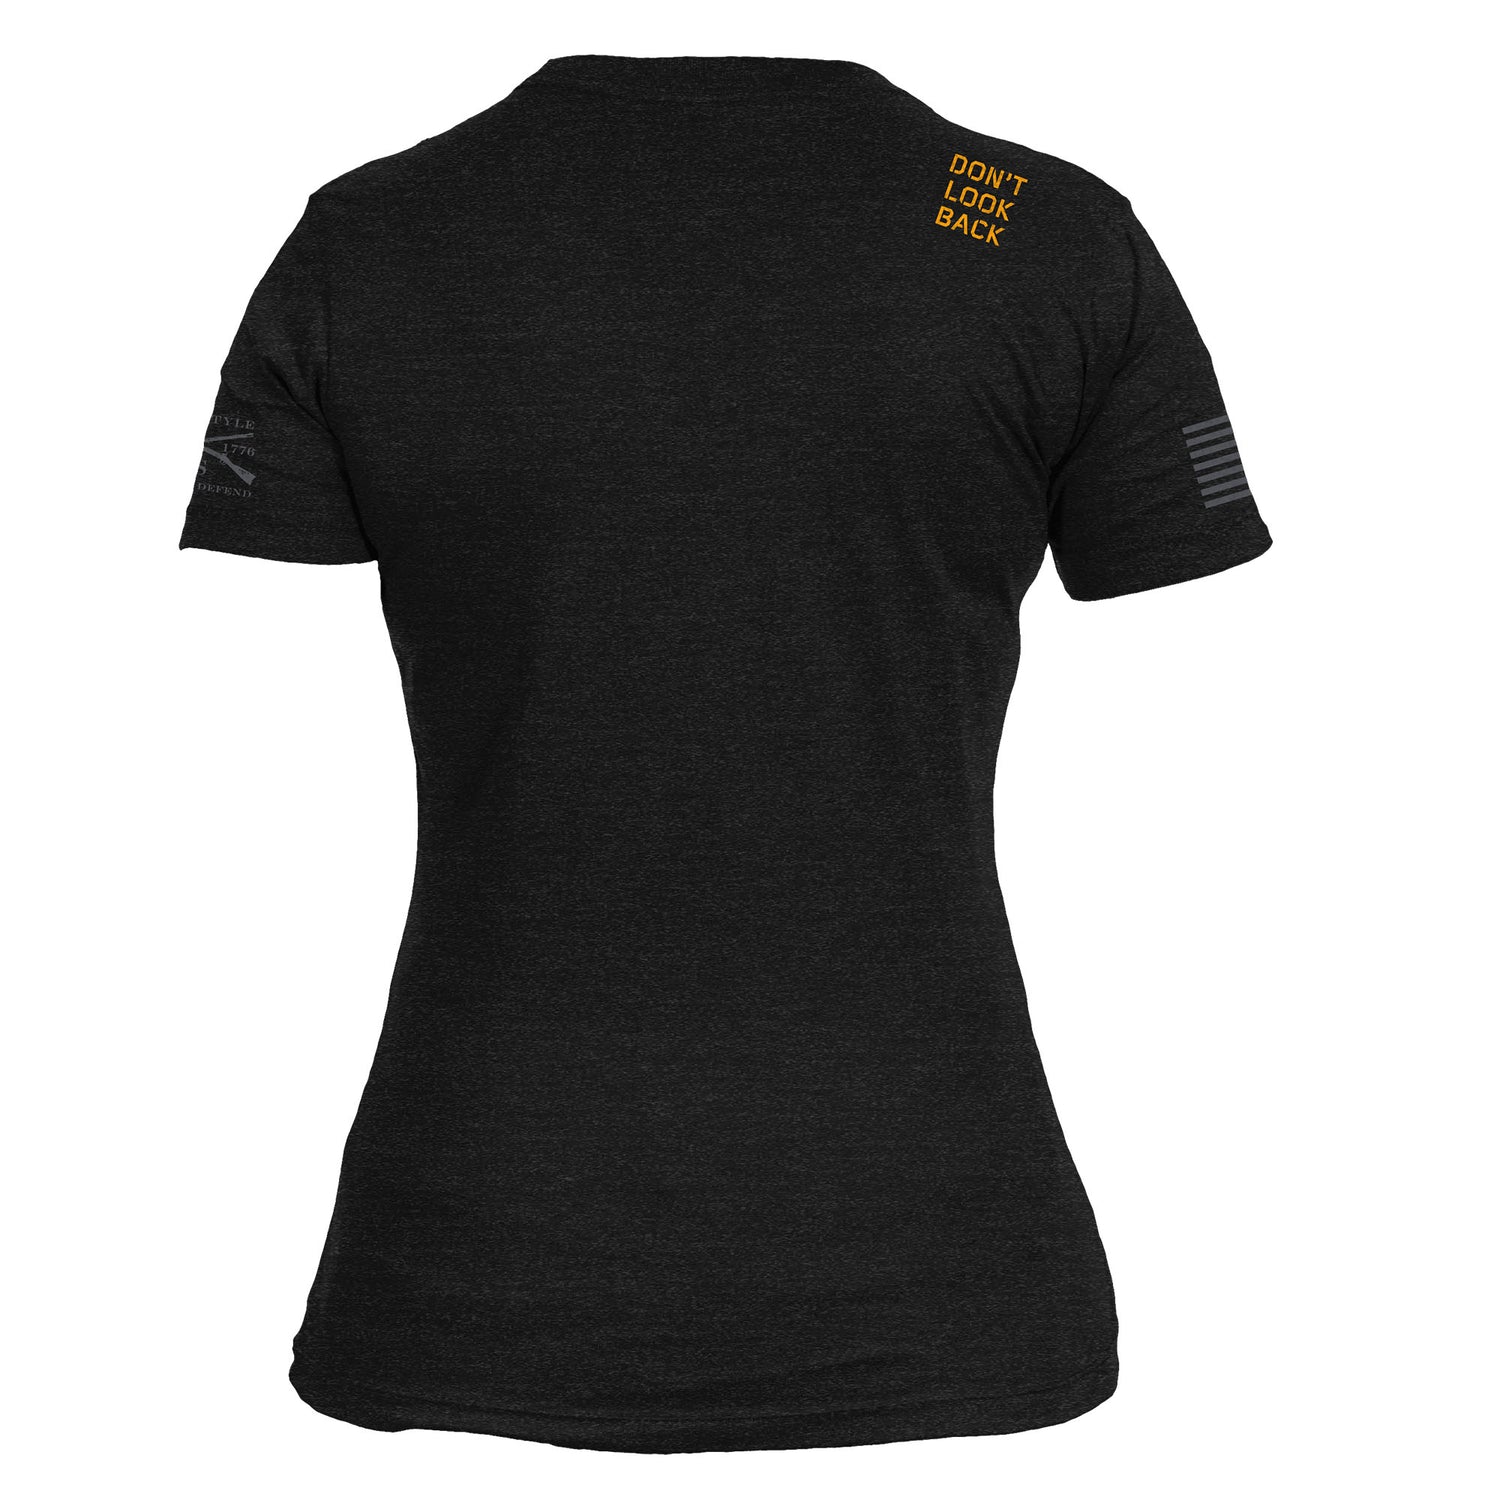 Don't Look Back - Shirts for Women at the Gym 